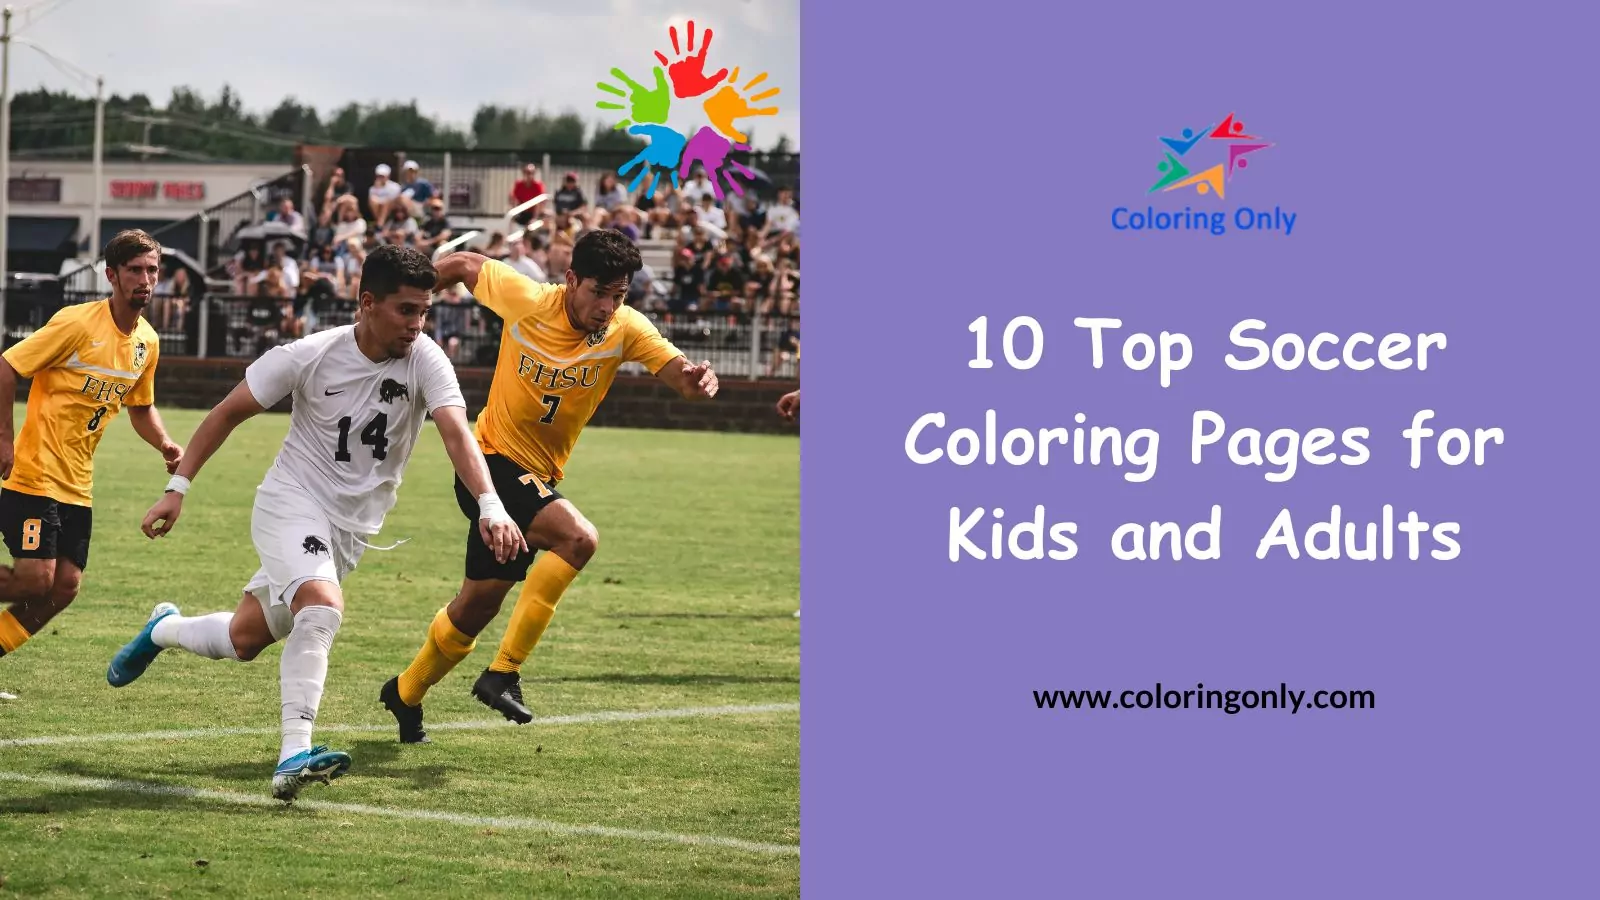 10 Top Soccer Coloring Pages for Kids and Adults